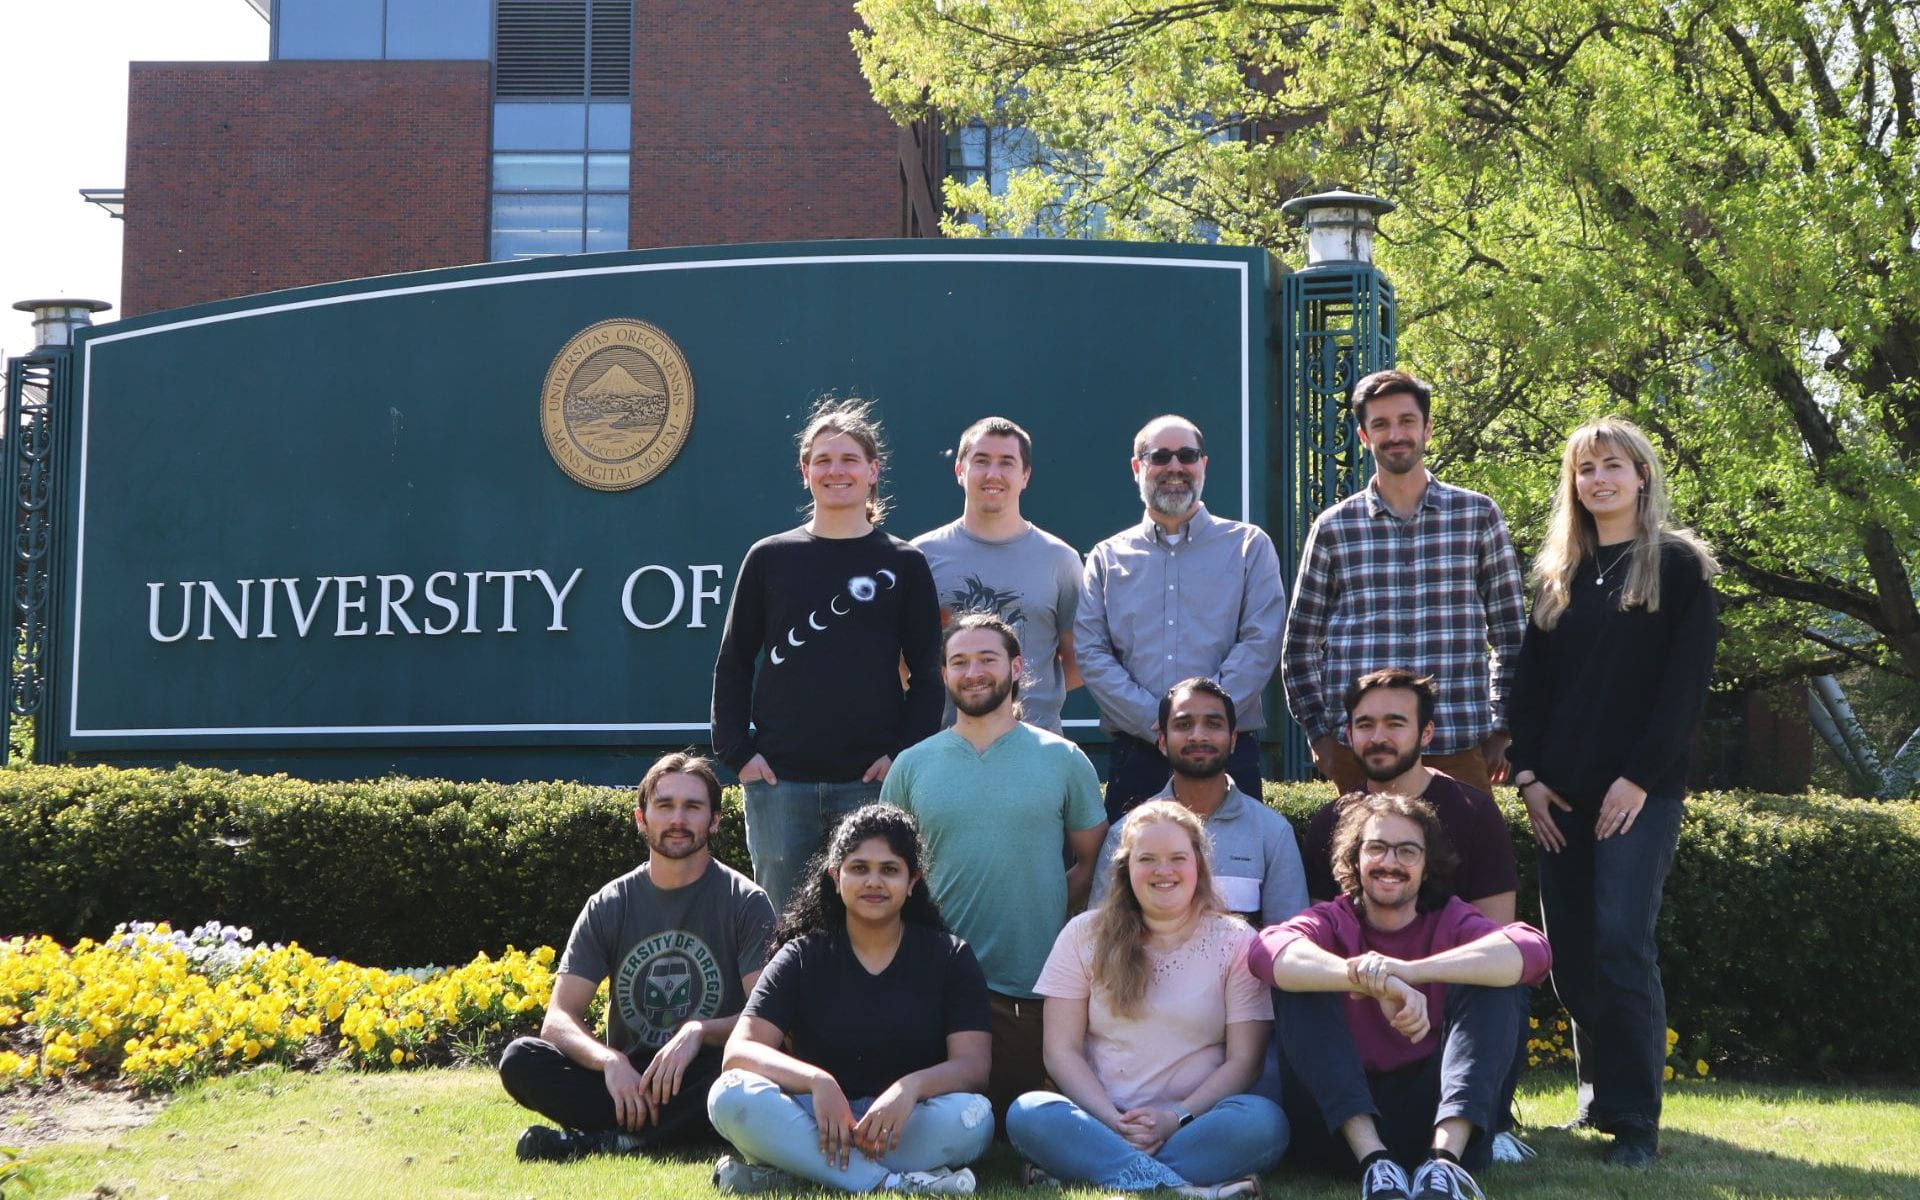 Group of electrochemistry researchers sitting and standing on the lawn in front of the University of Oregon sign